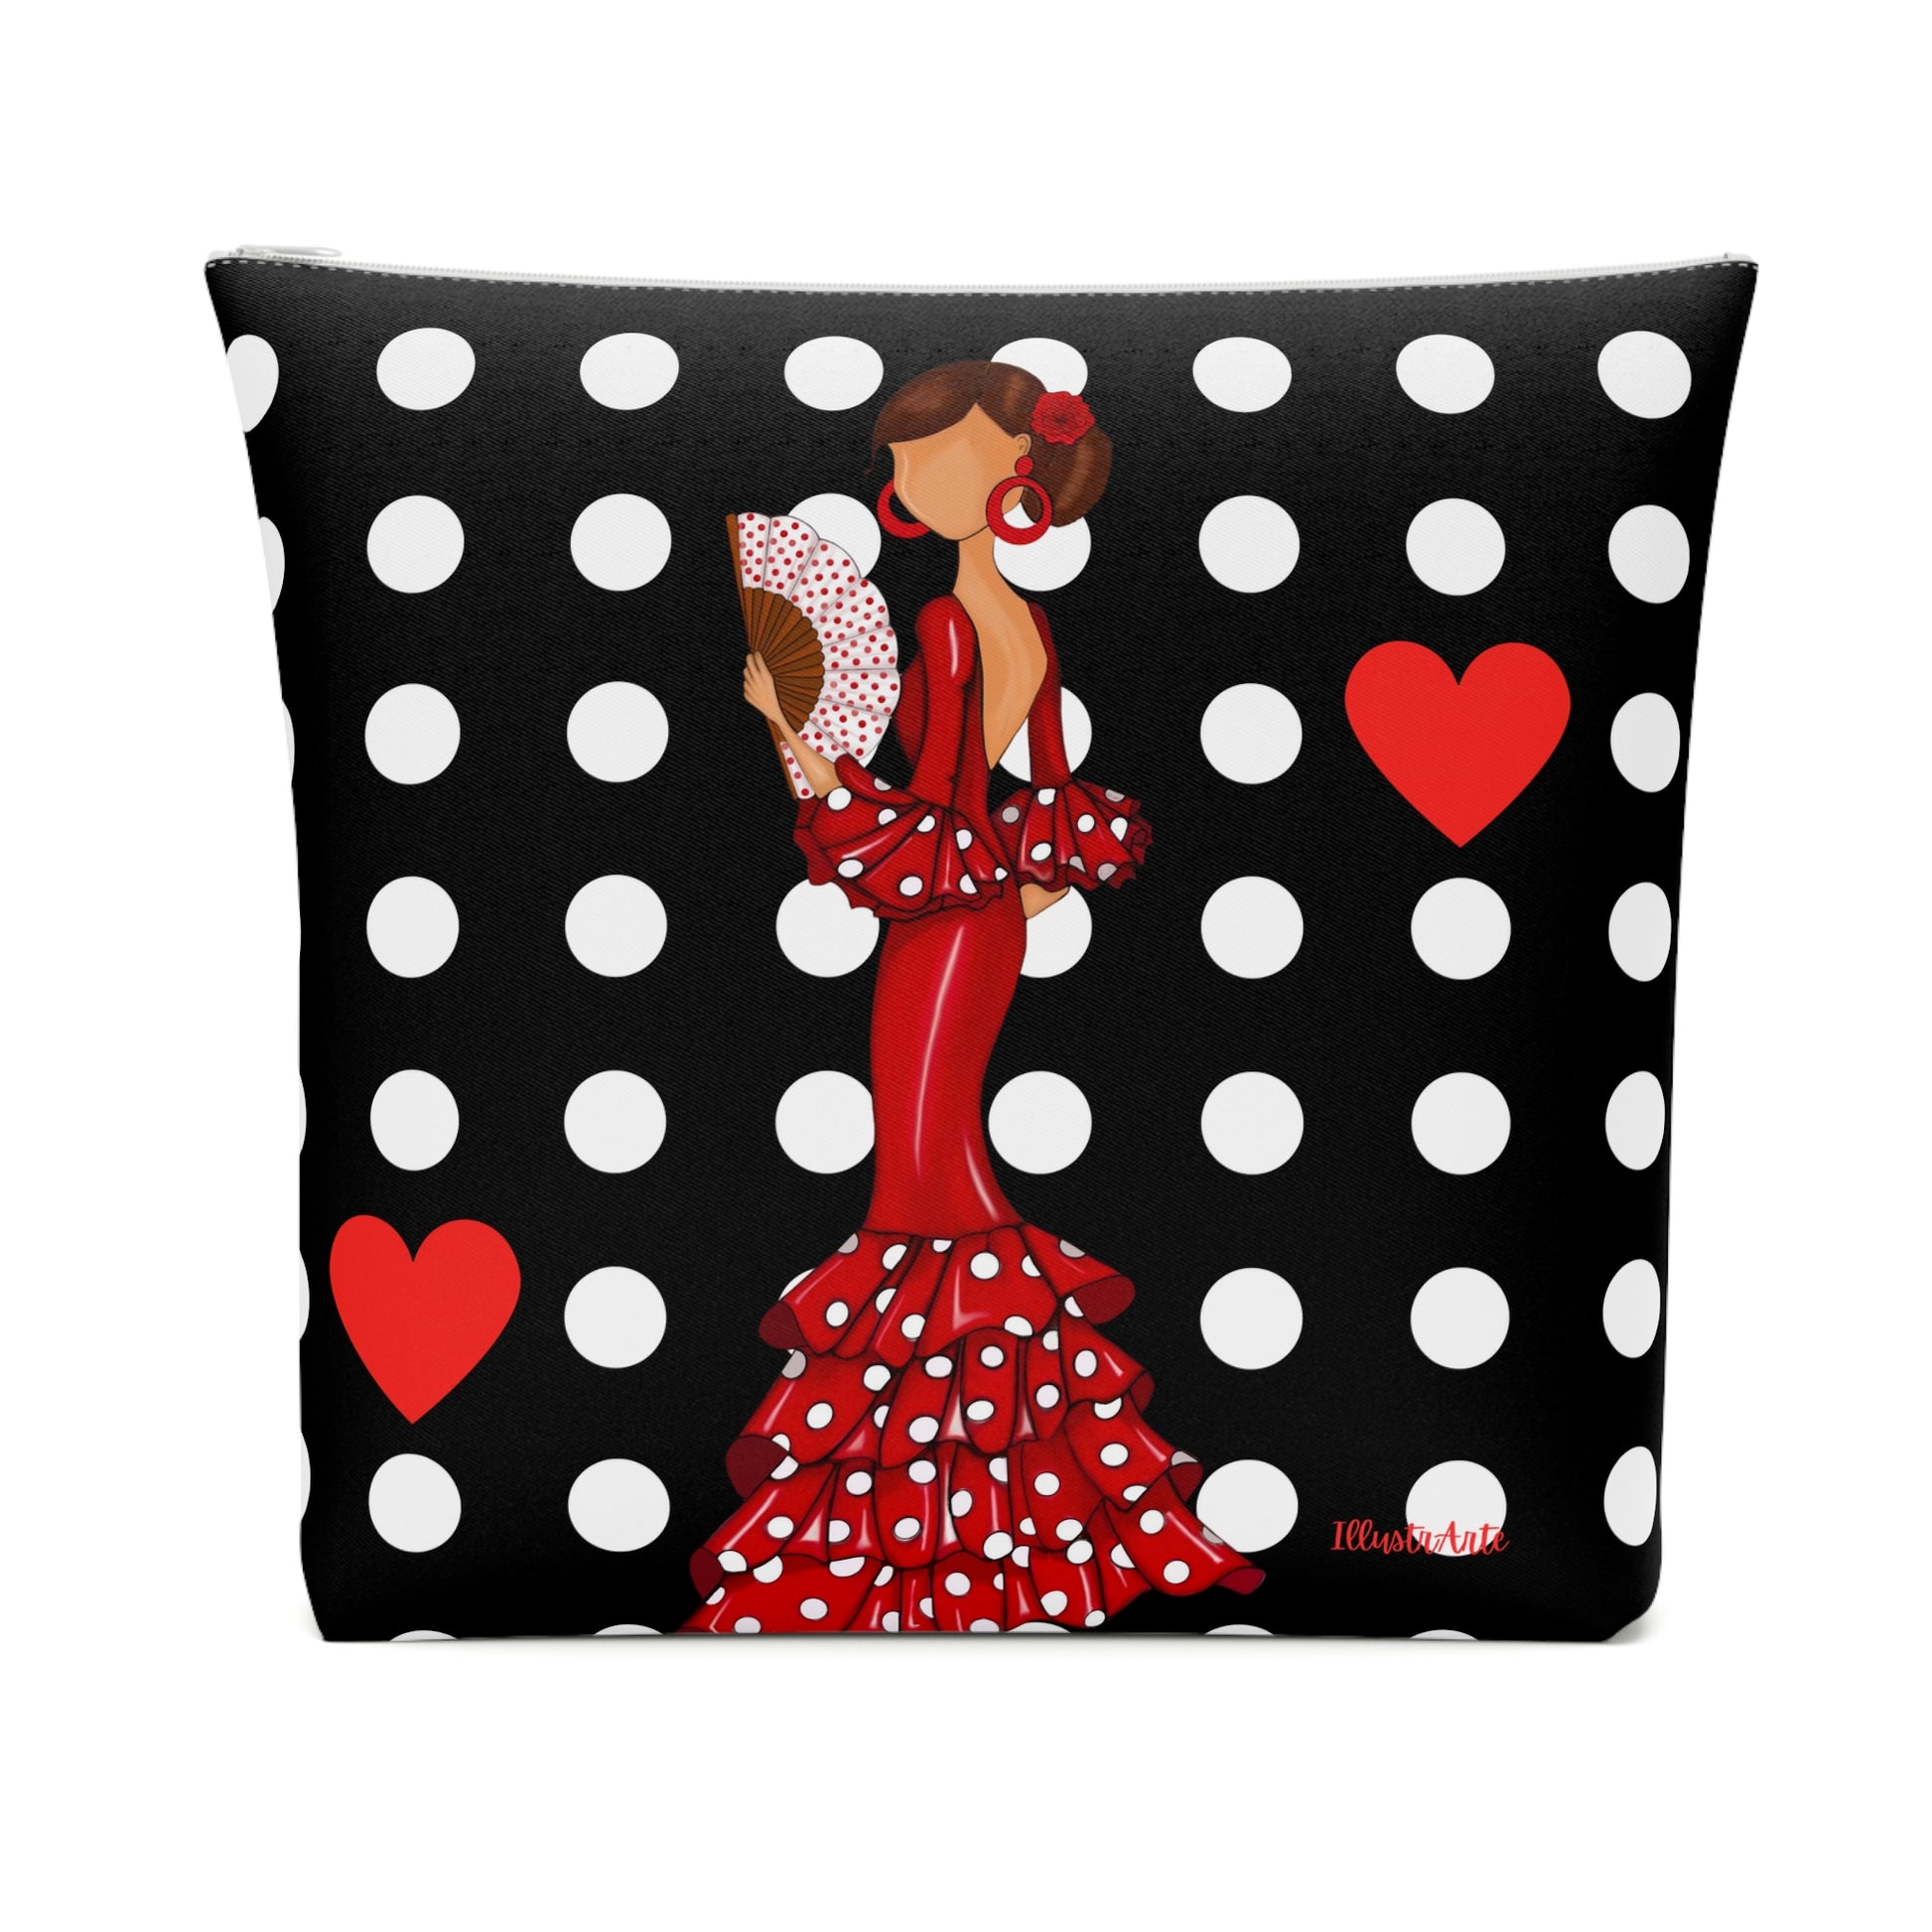 a black and white polka dot pillow with a woman in a red dress holding a